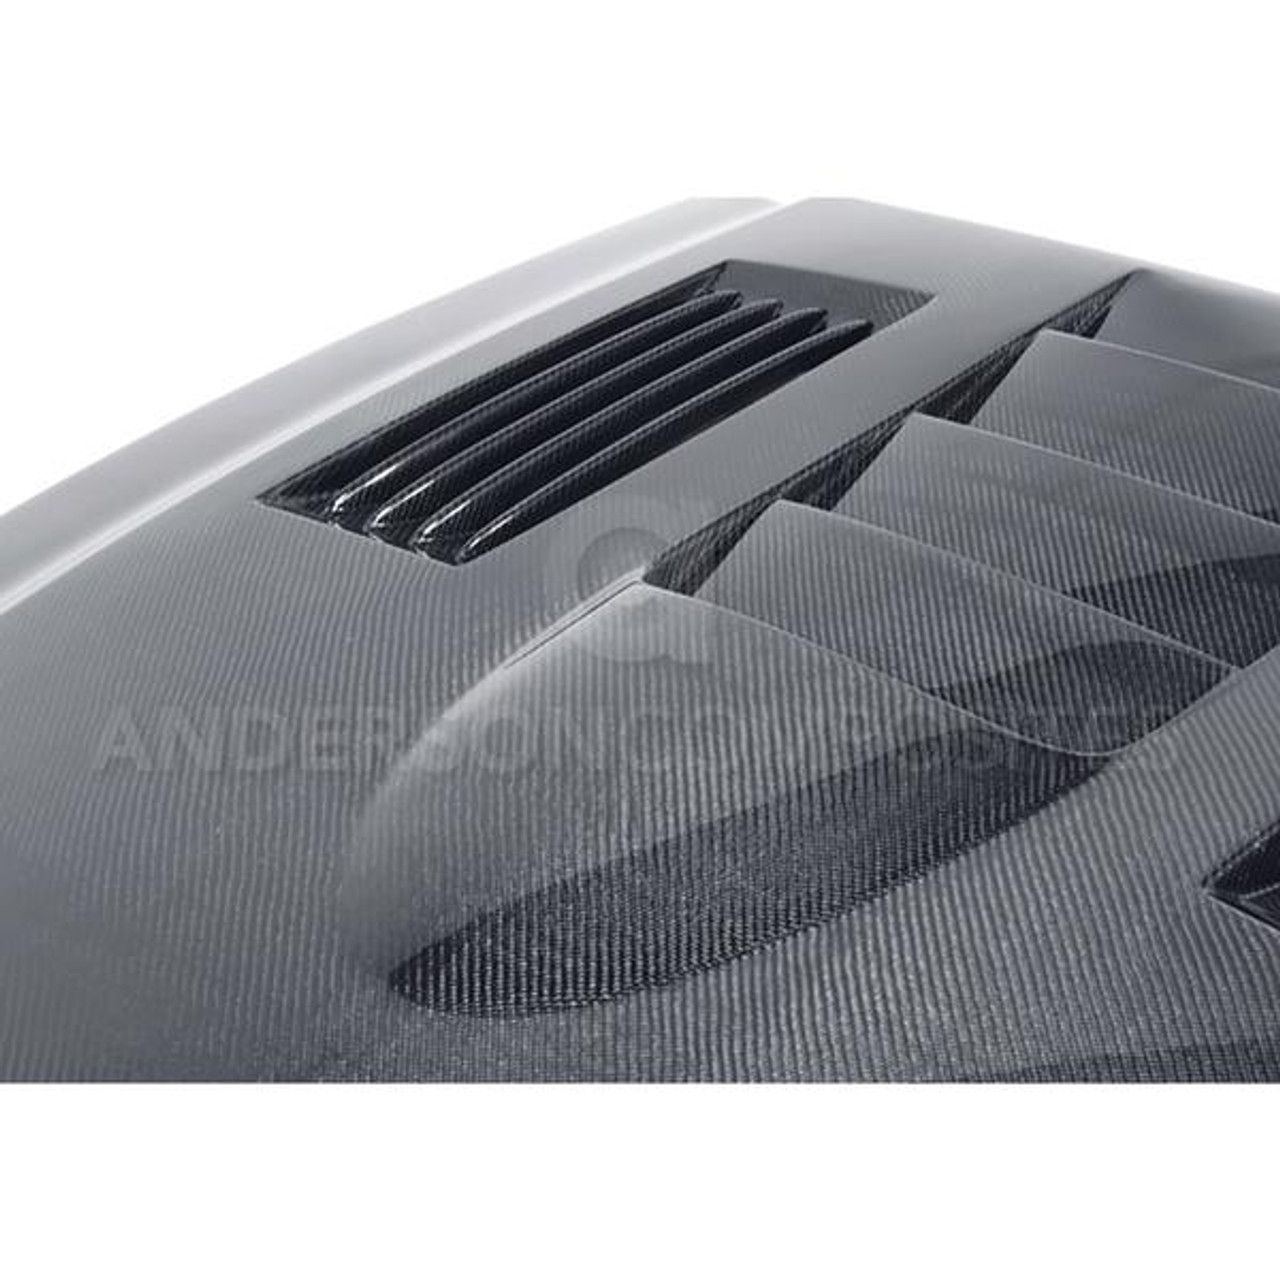 Anderson Composites 2010 - 2014 Shelby GT500 and 2013 - 2014 Mustang Carbon Fiber Heat Extractor Hood